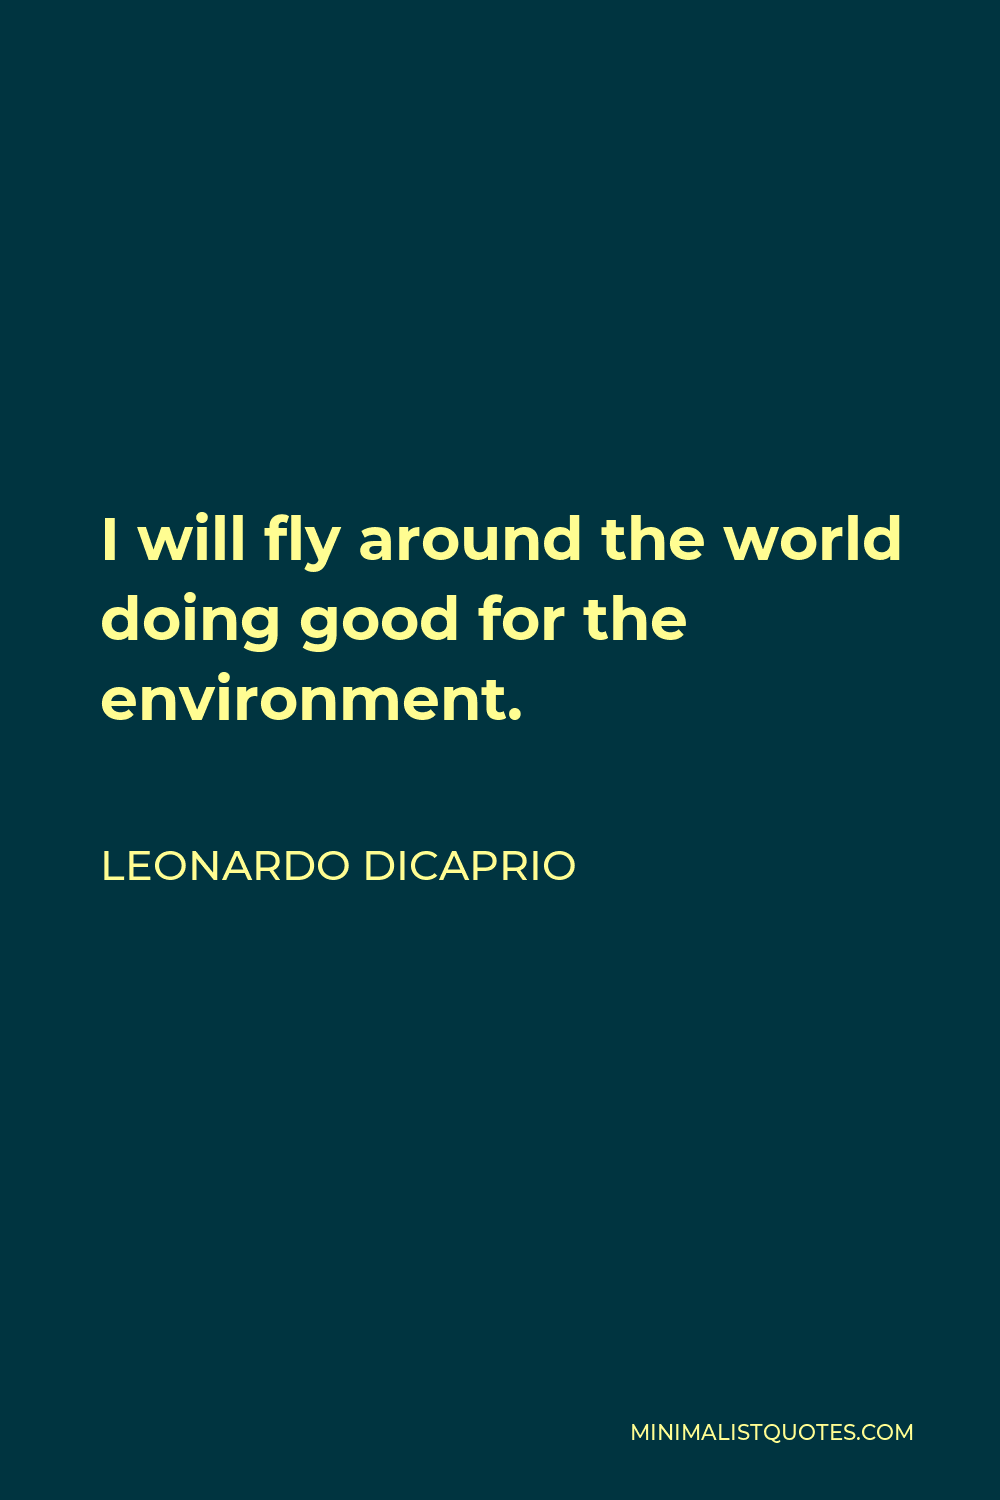 Leonardo DiCaprio Quote - I will fly around the world doing good for the environment.